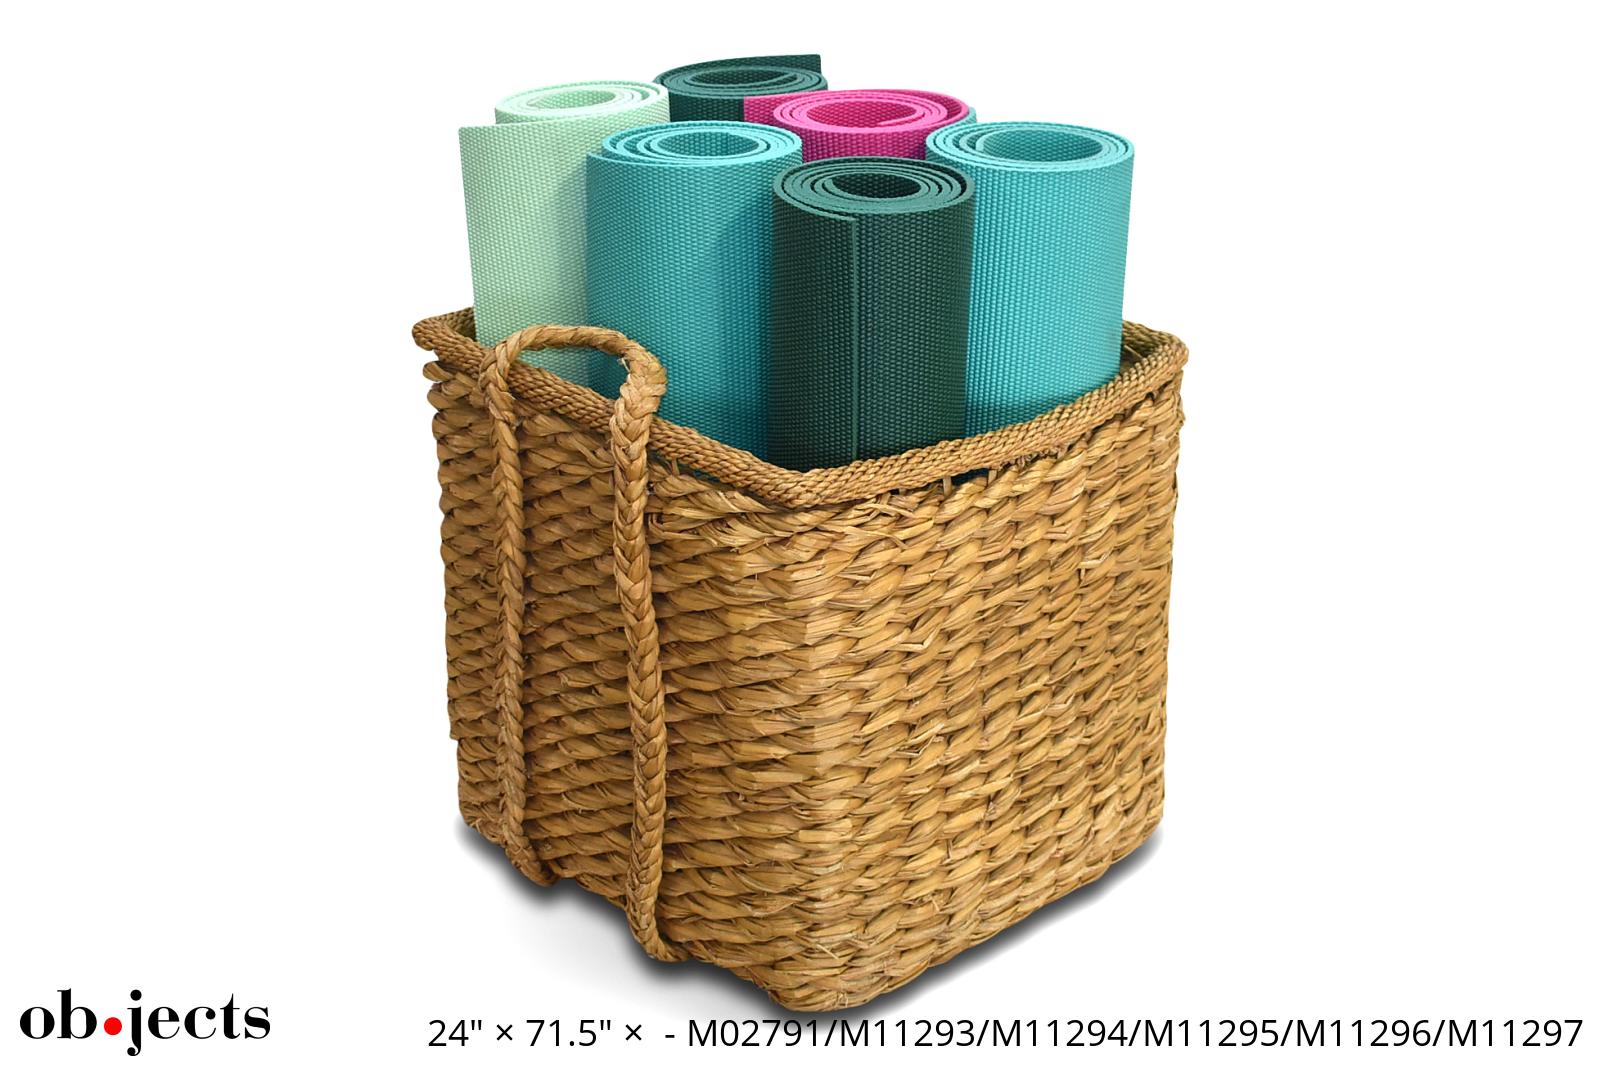 Yoga/Exercise Mats Assorted Colors (Baskets Not Included)